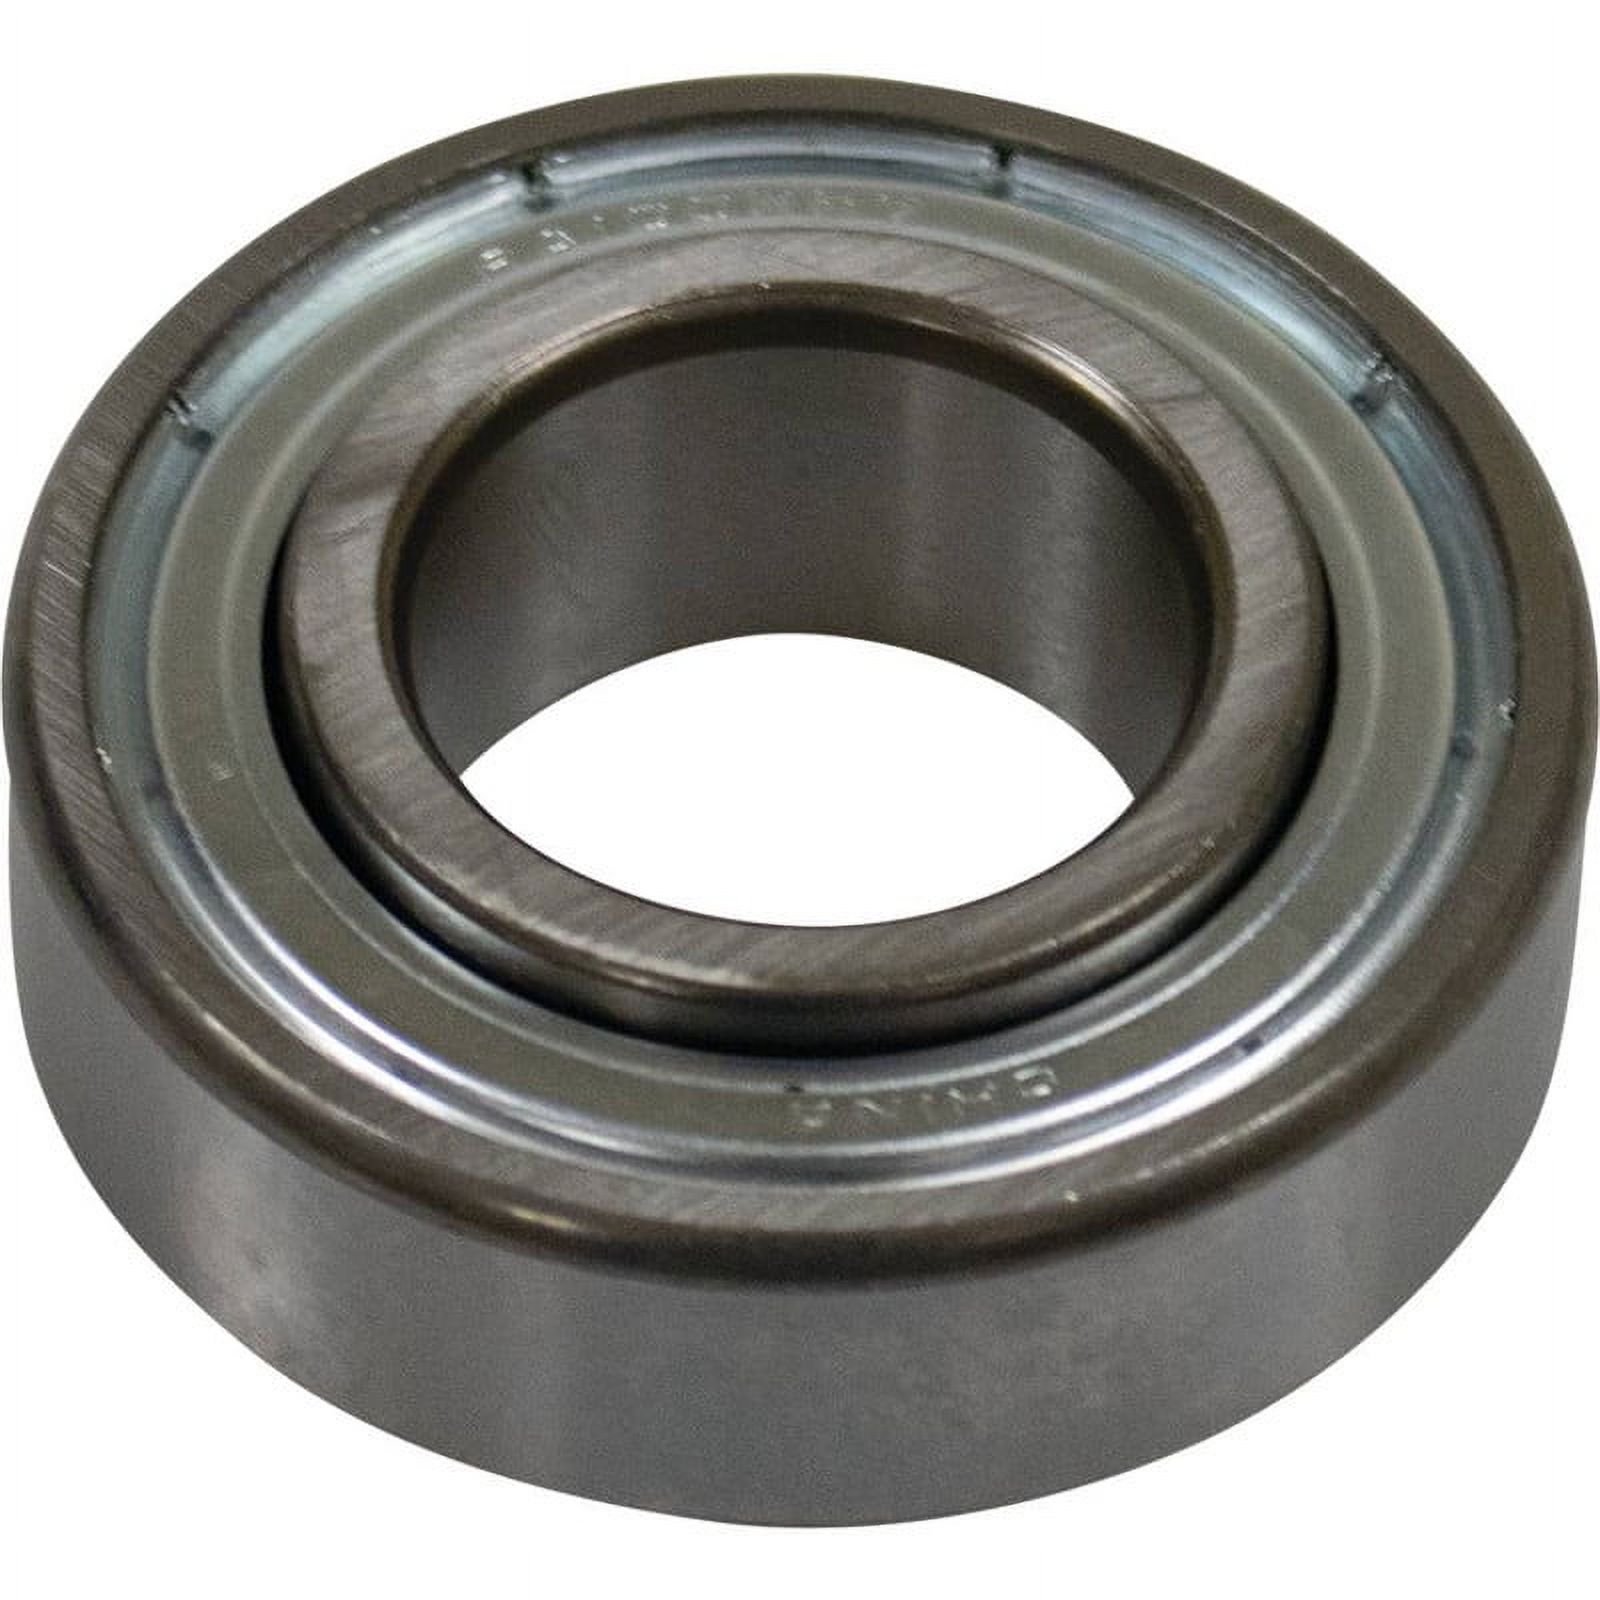 6 Pack Dixon Lawn Mower Spindle Bearing 539125515, Premium Double Sealed Ball Bearing - image 1 of 1